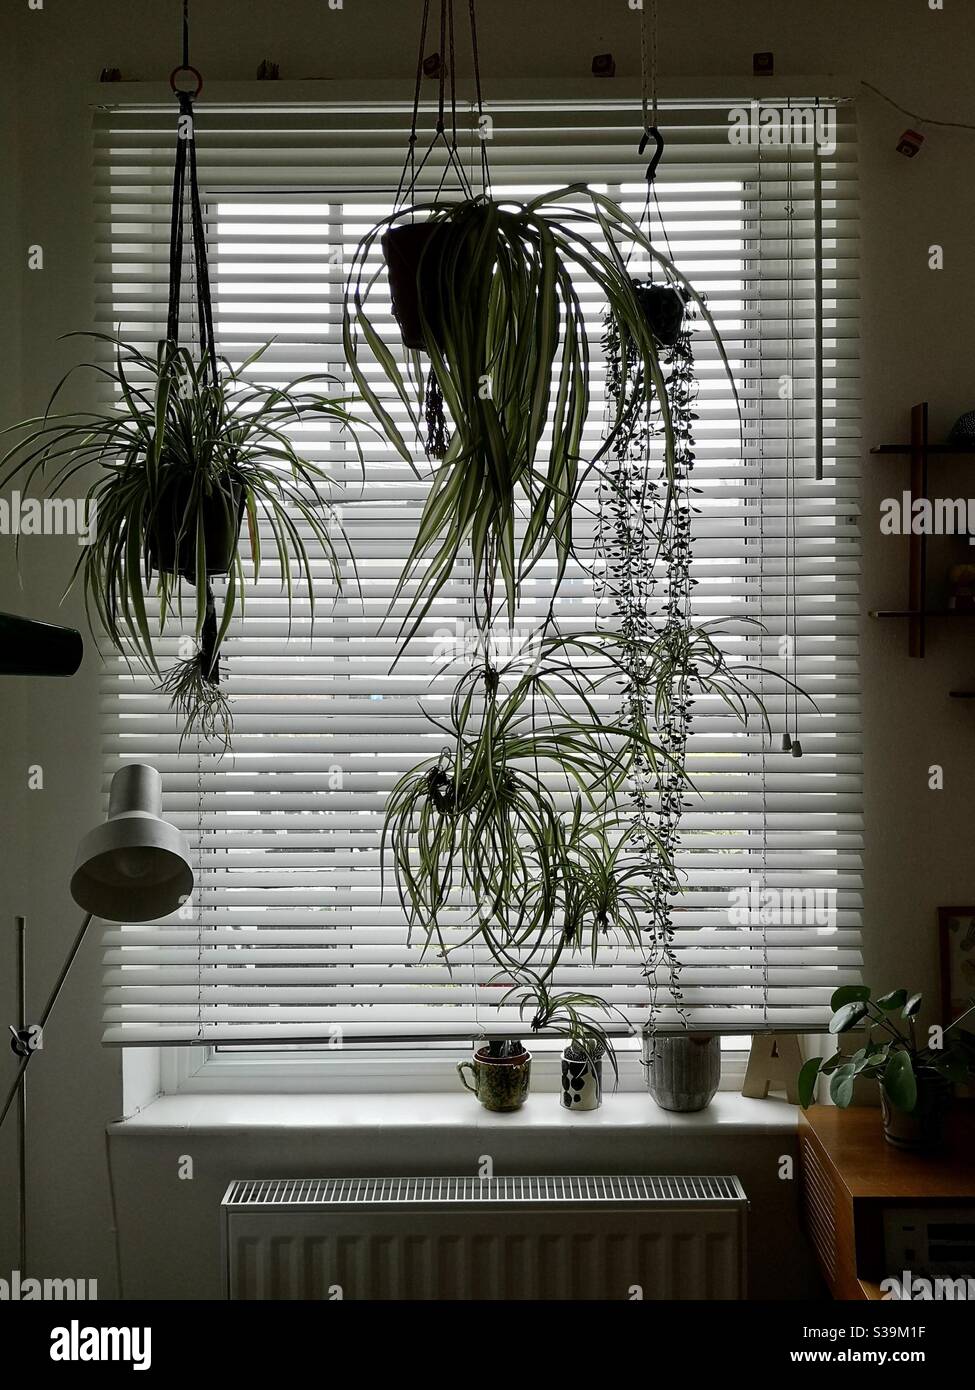 Hanging plants in apartment in front of closed Venetian blinds Stock Photo  - Alamy